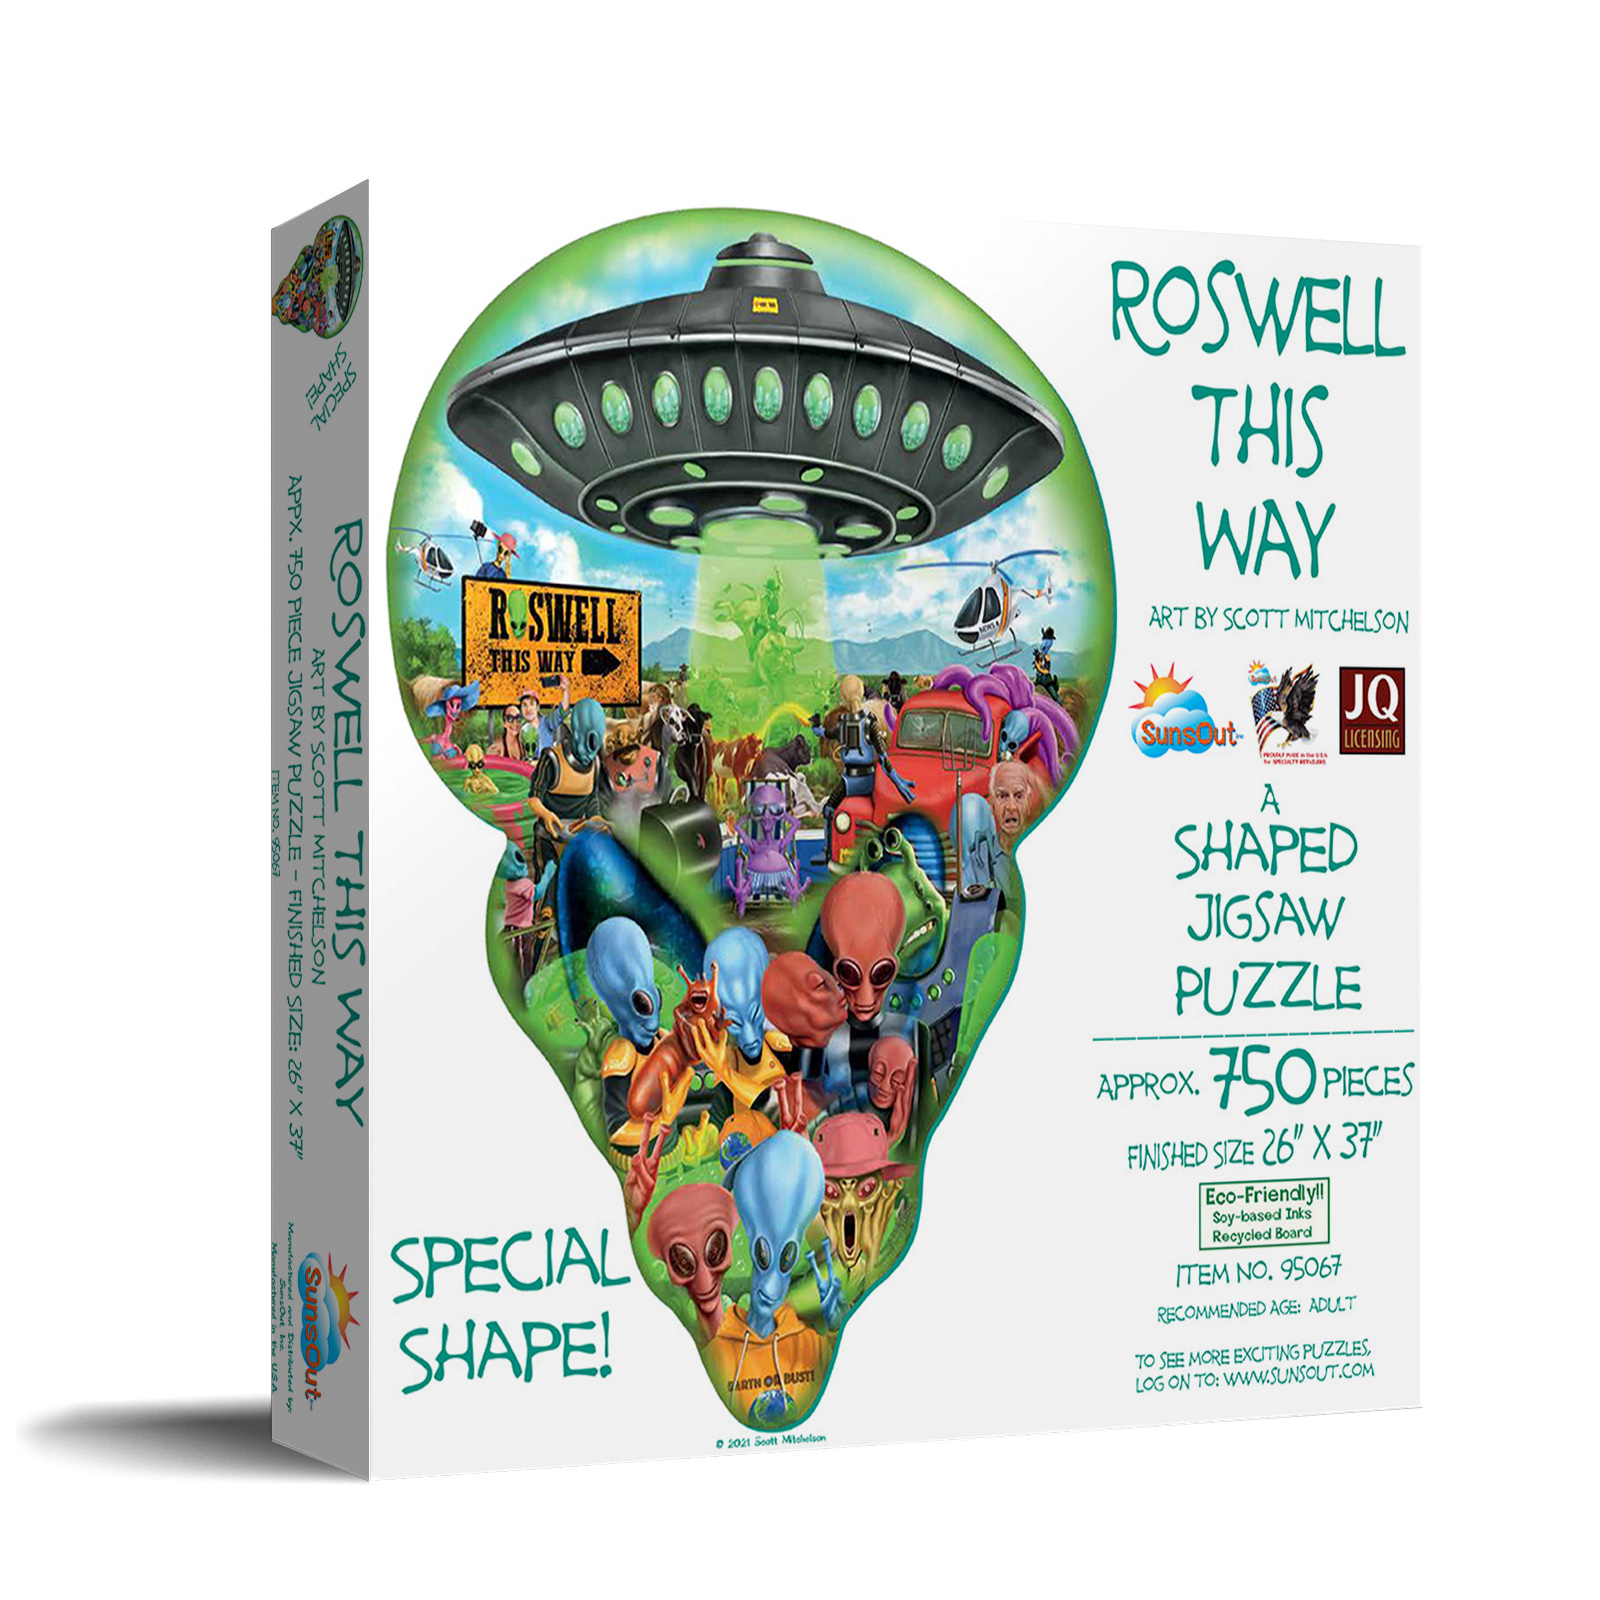 Roswell This Way